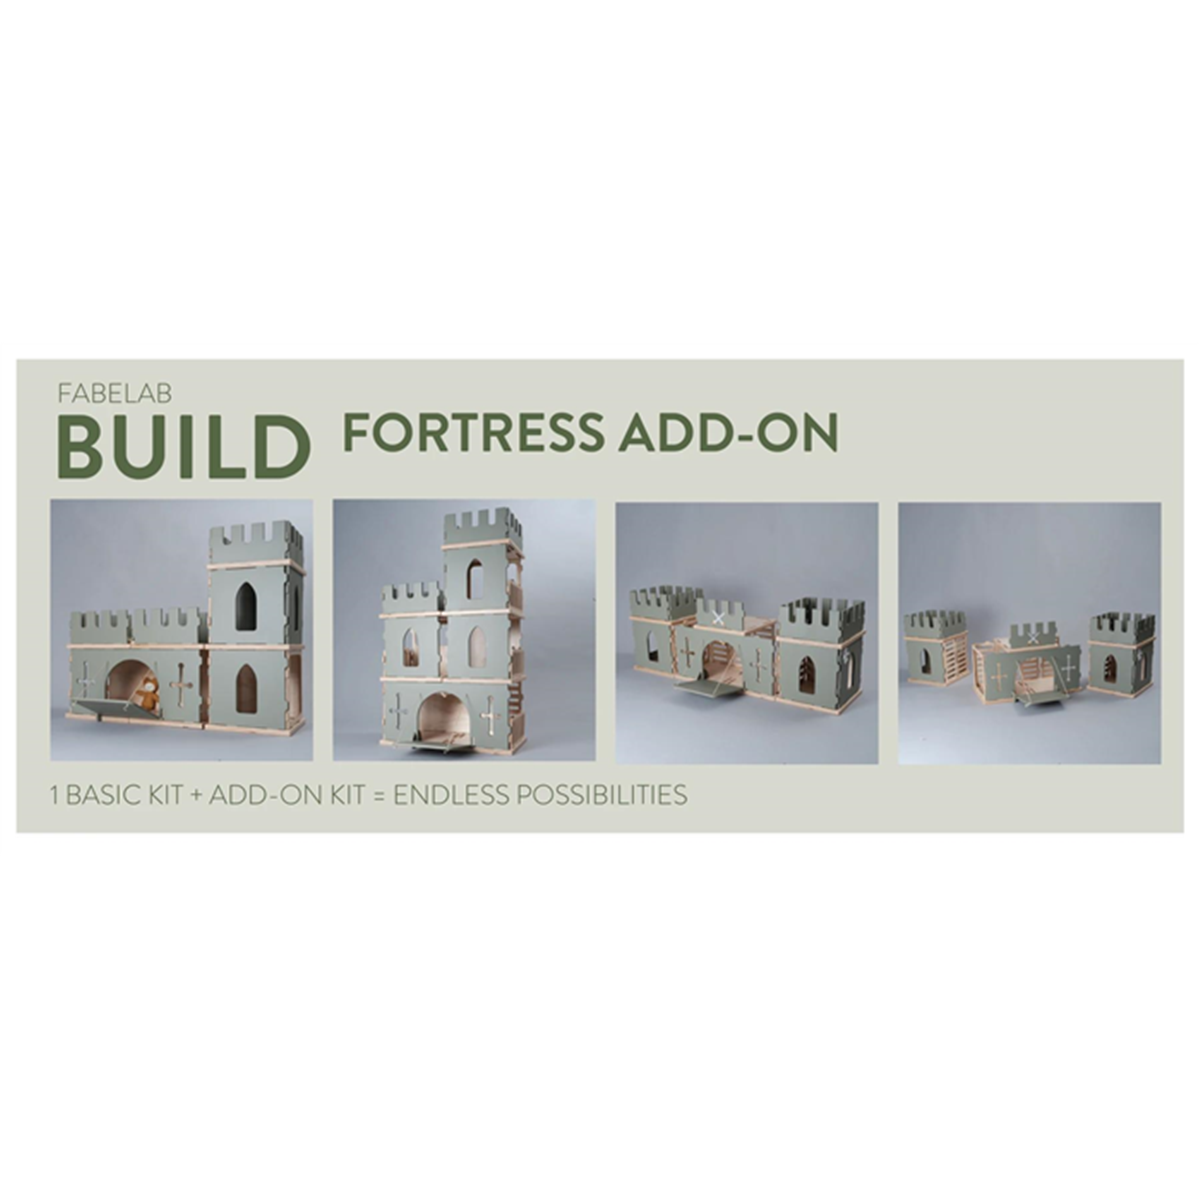 FABELAB Build Add-on Fortress